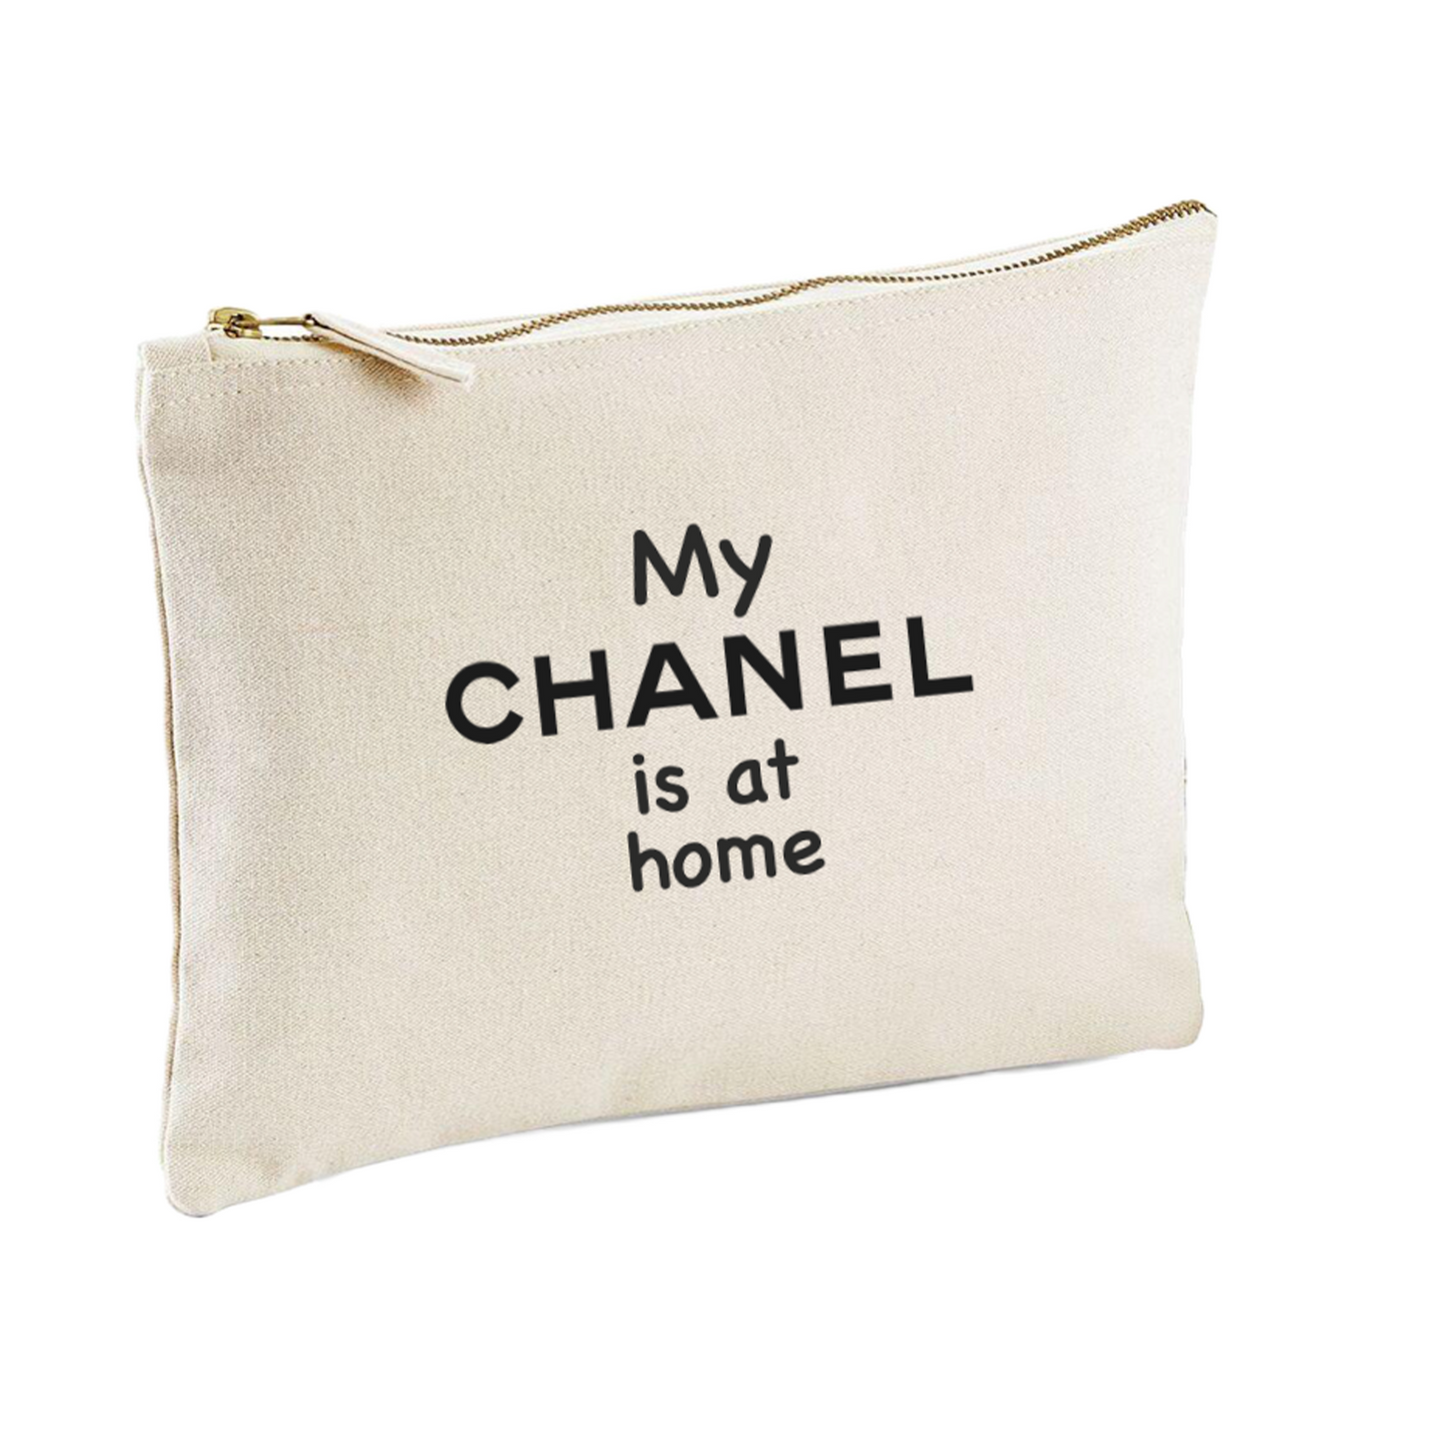 Pochette My CHANEL is at home